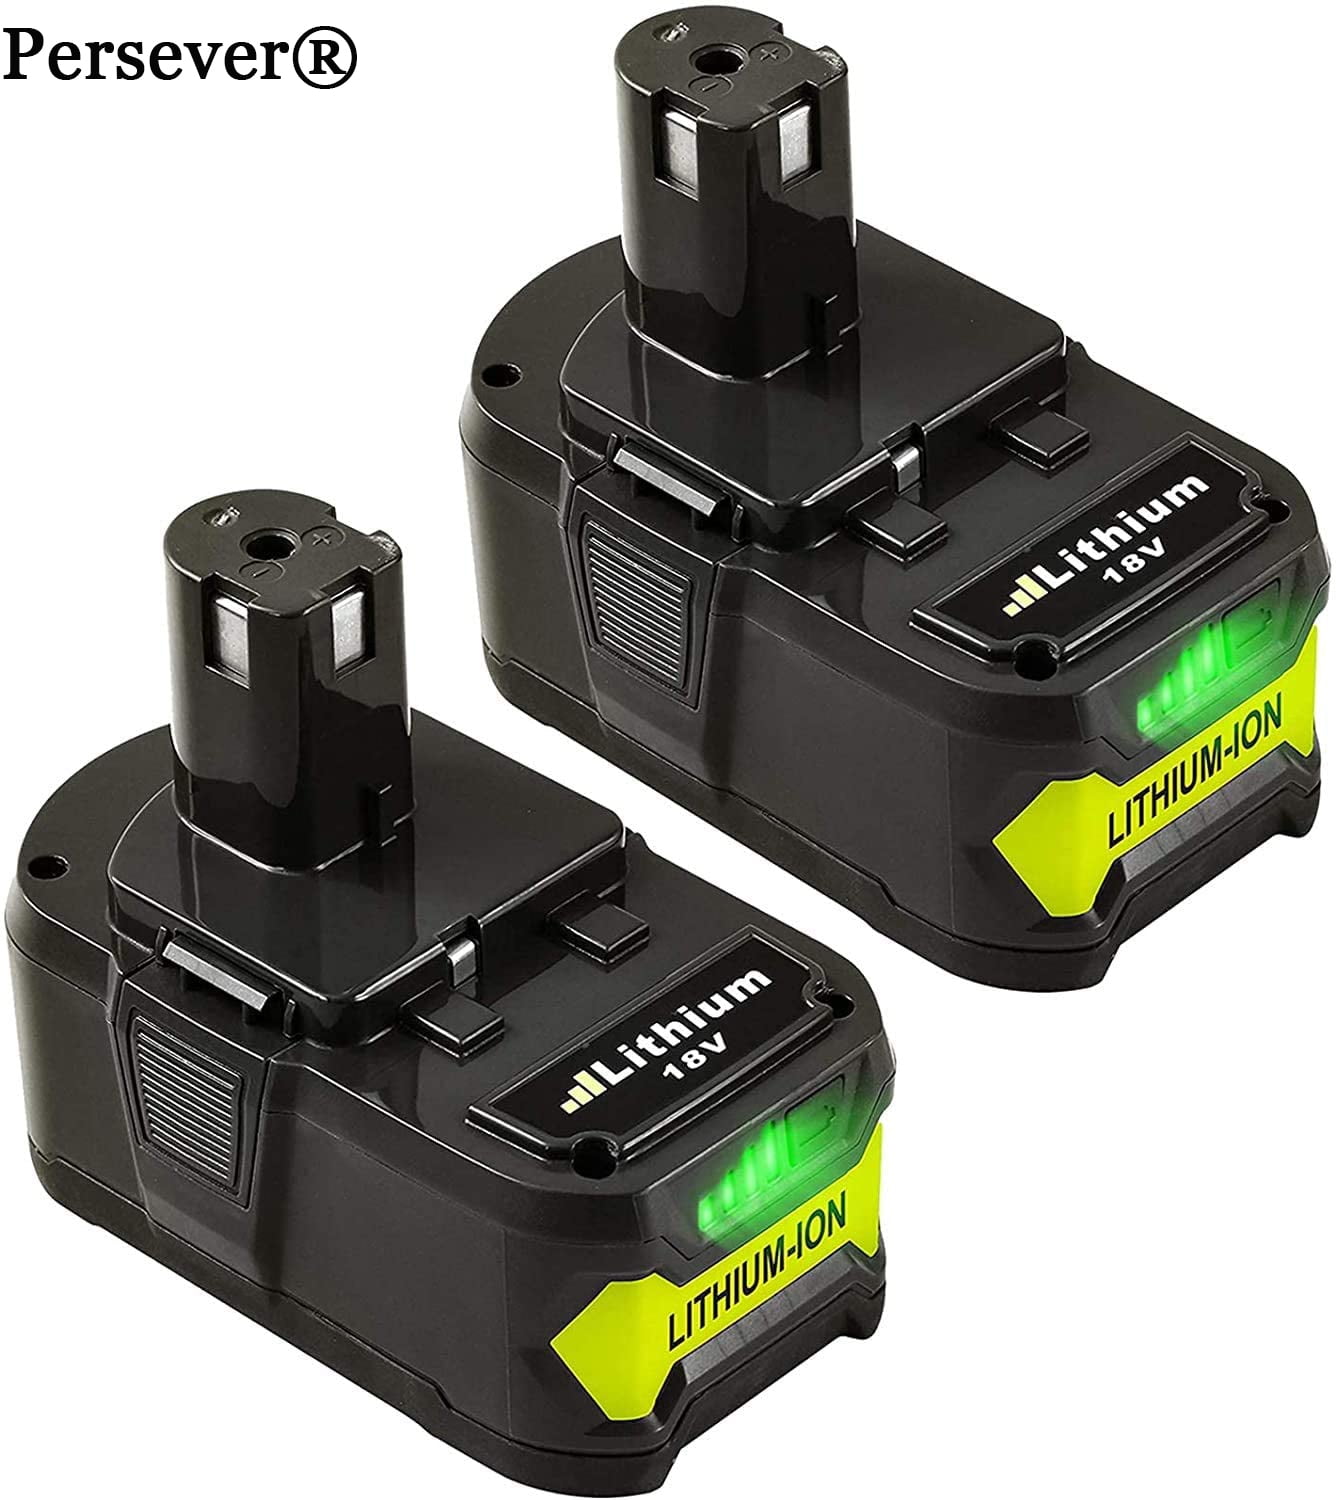 2x 6.0ah 18v High Capacity Replace for Ryobi Lithium Battery One Plus P105 P108 for sale online 